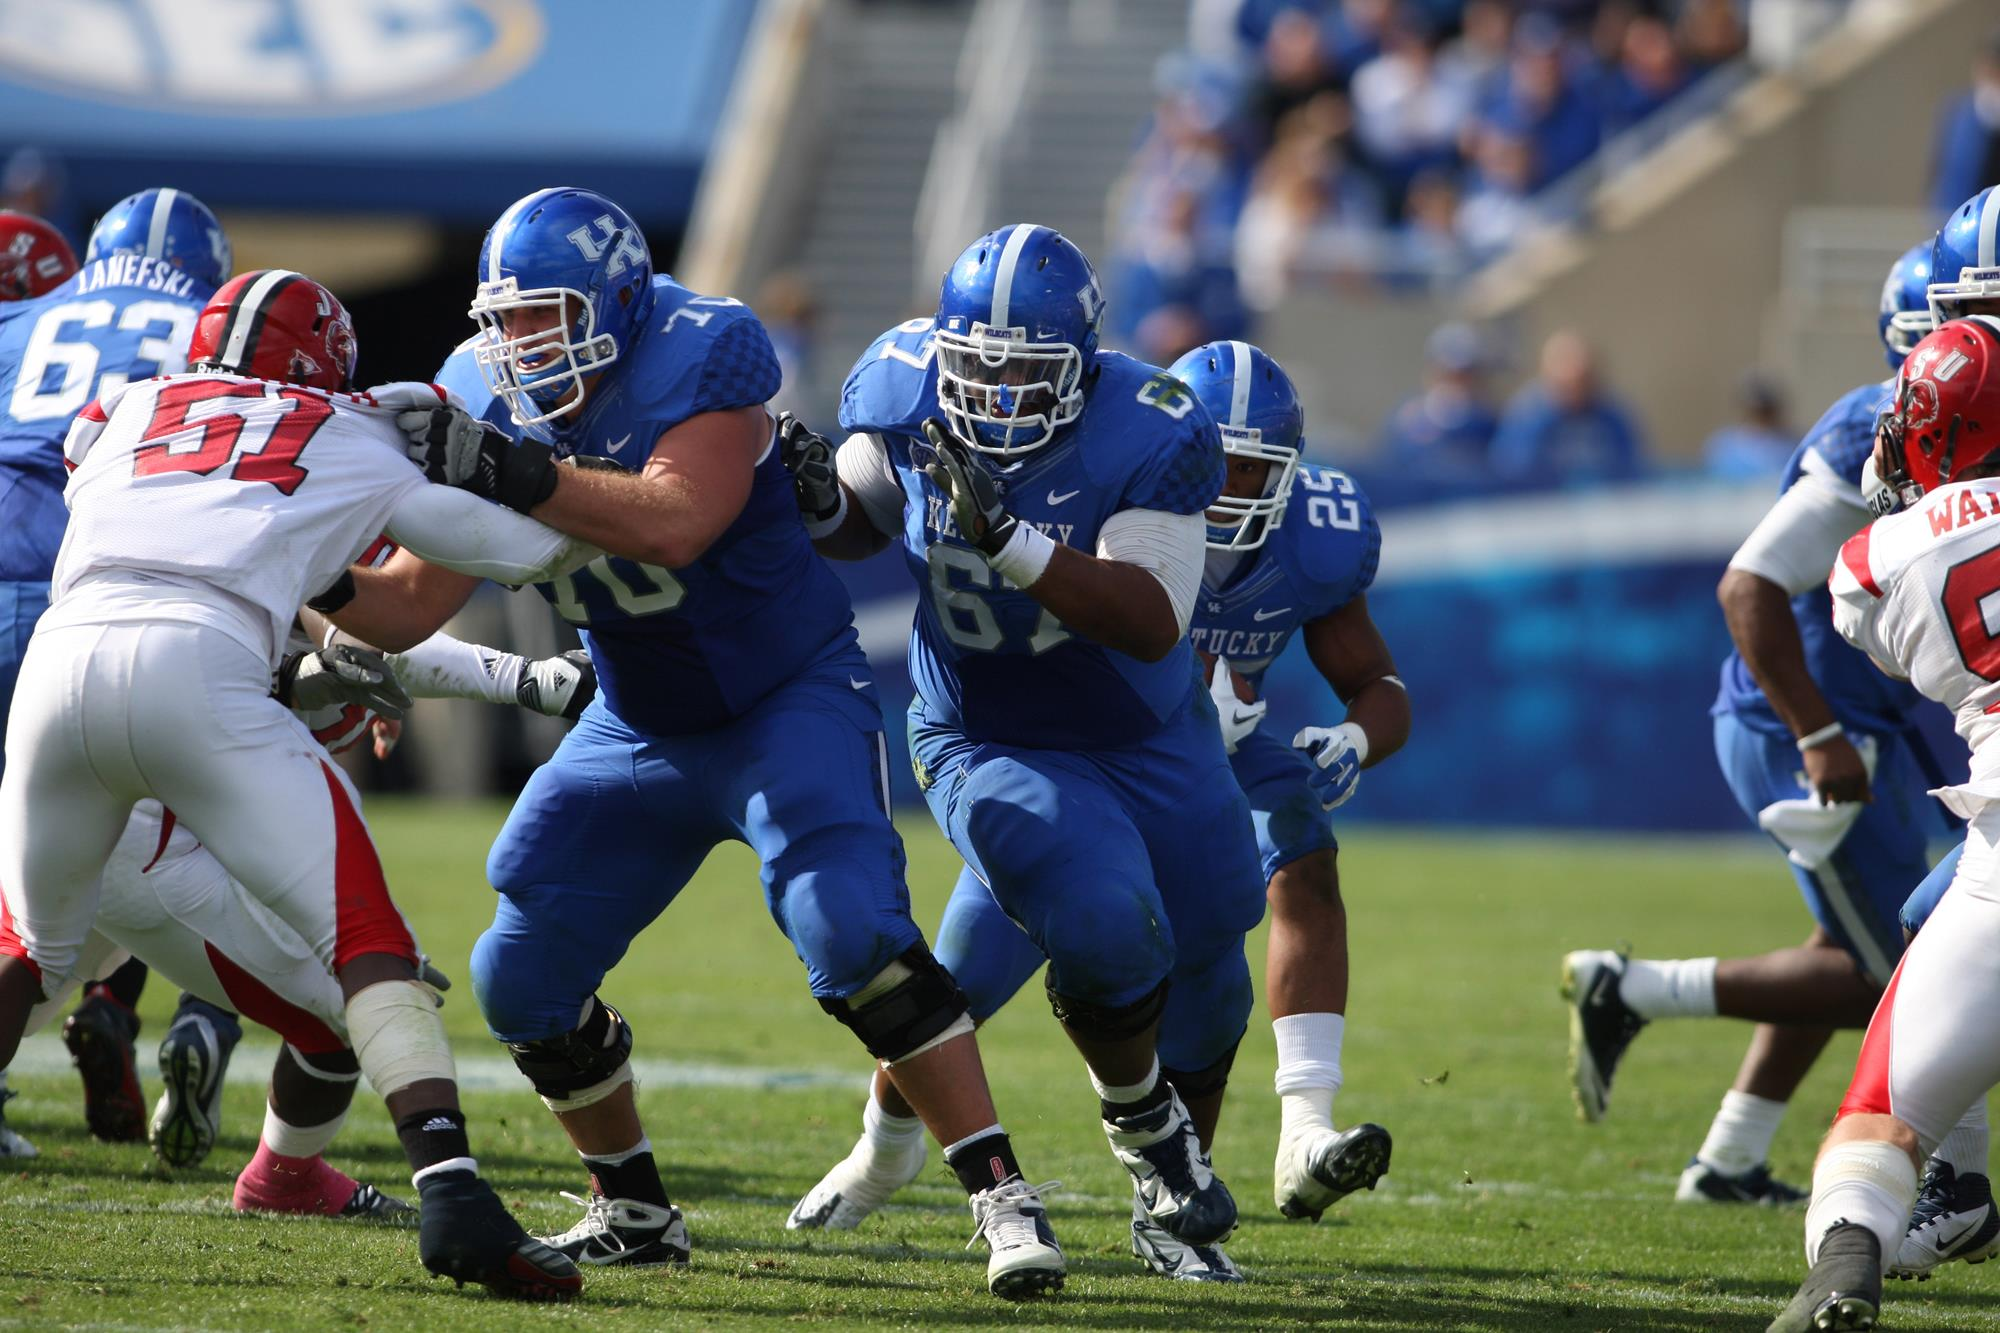 Former Wildcat Larry Warford Selected to NFL Pro Bowl